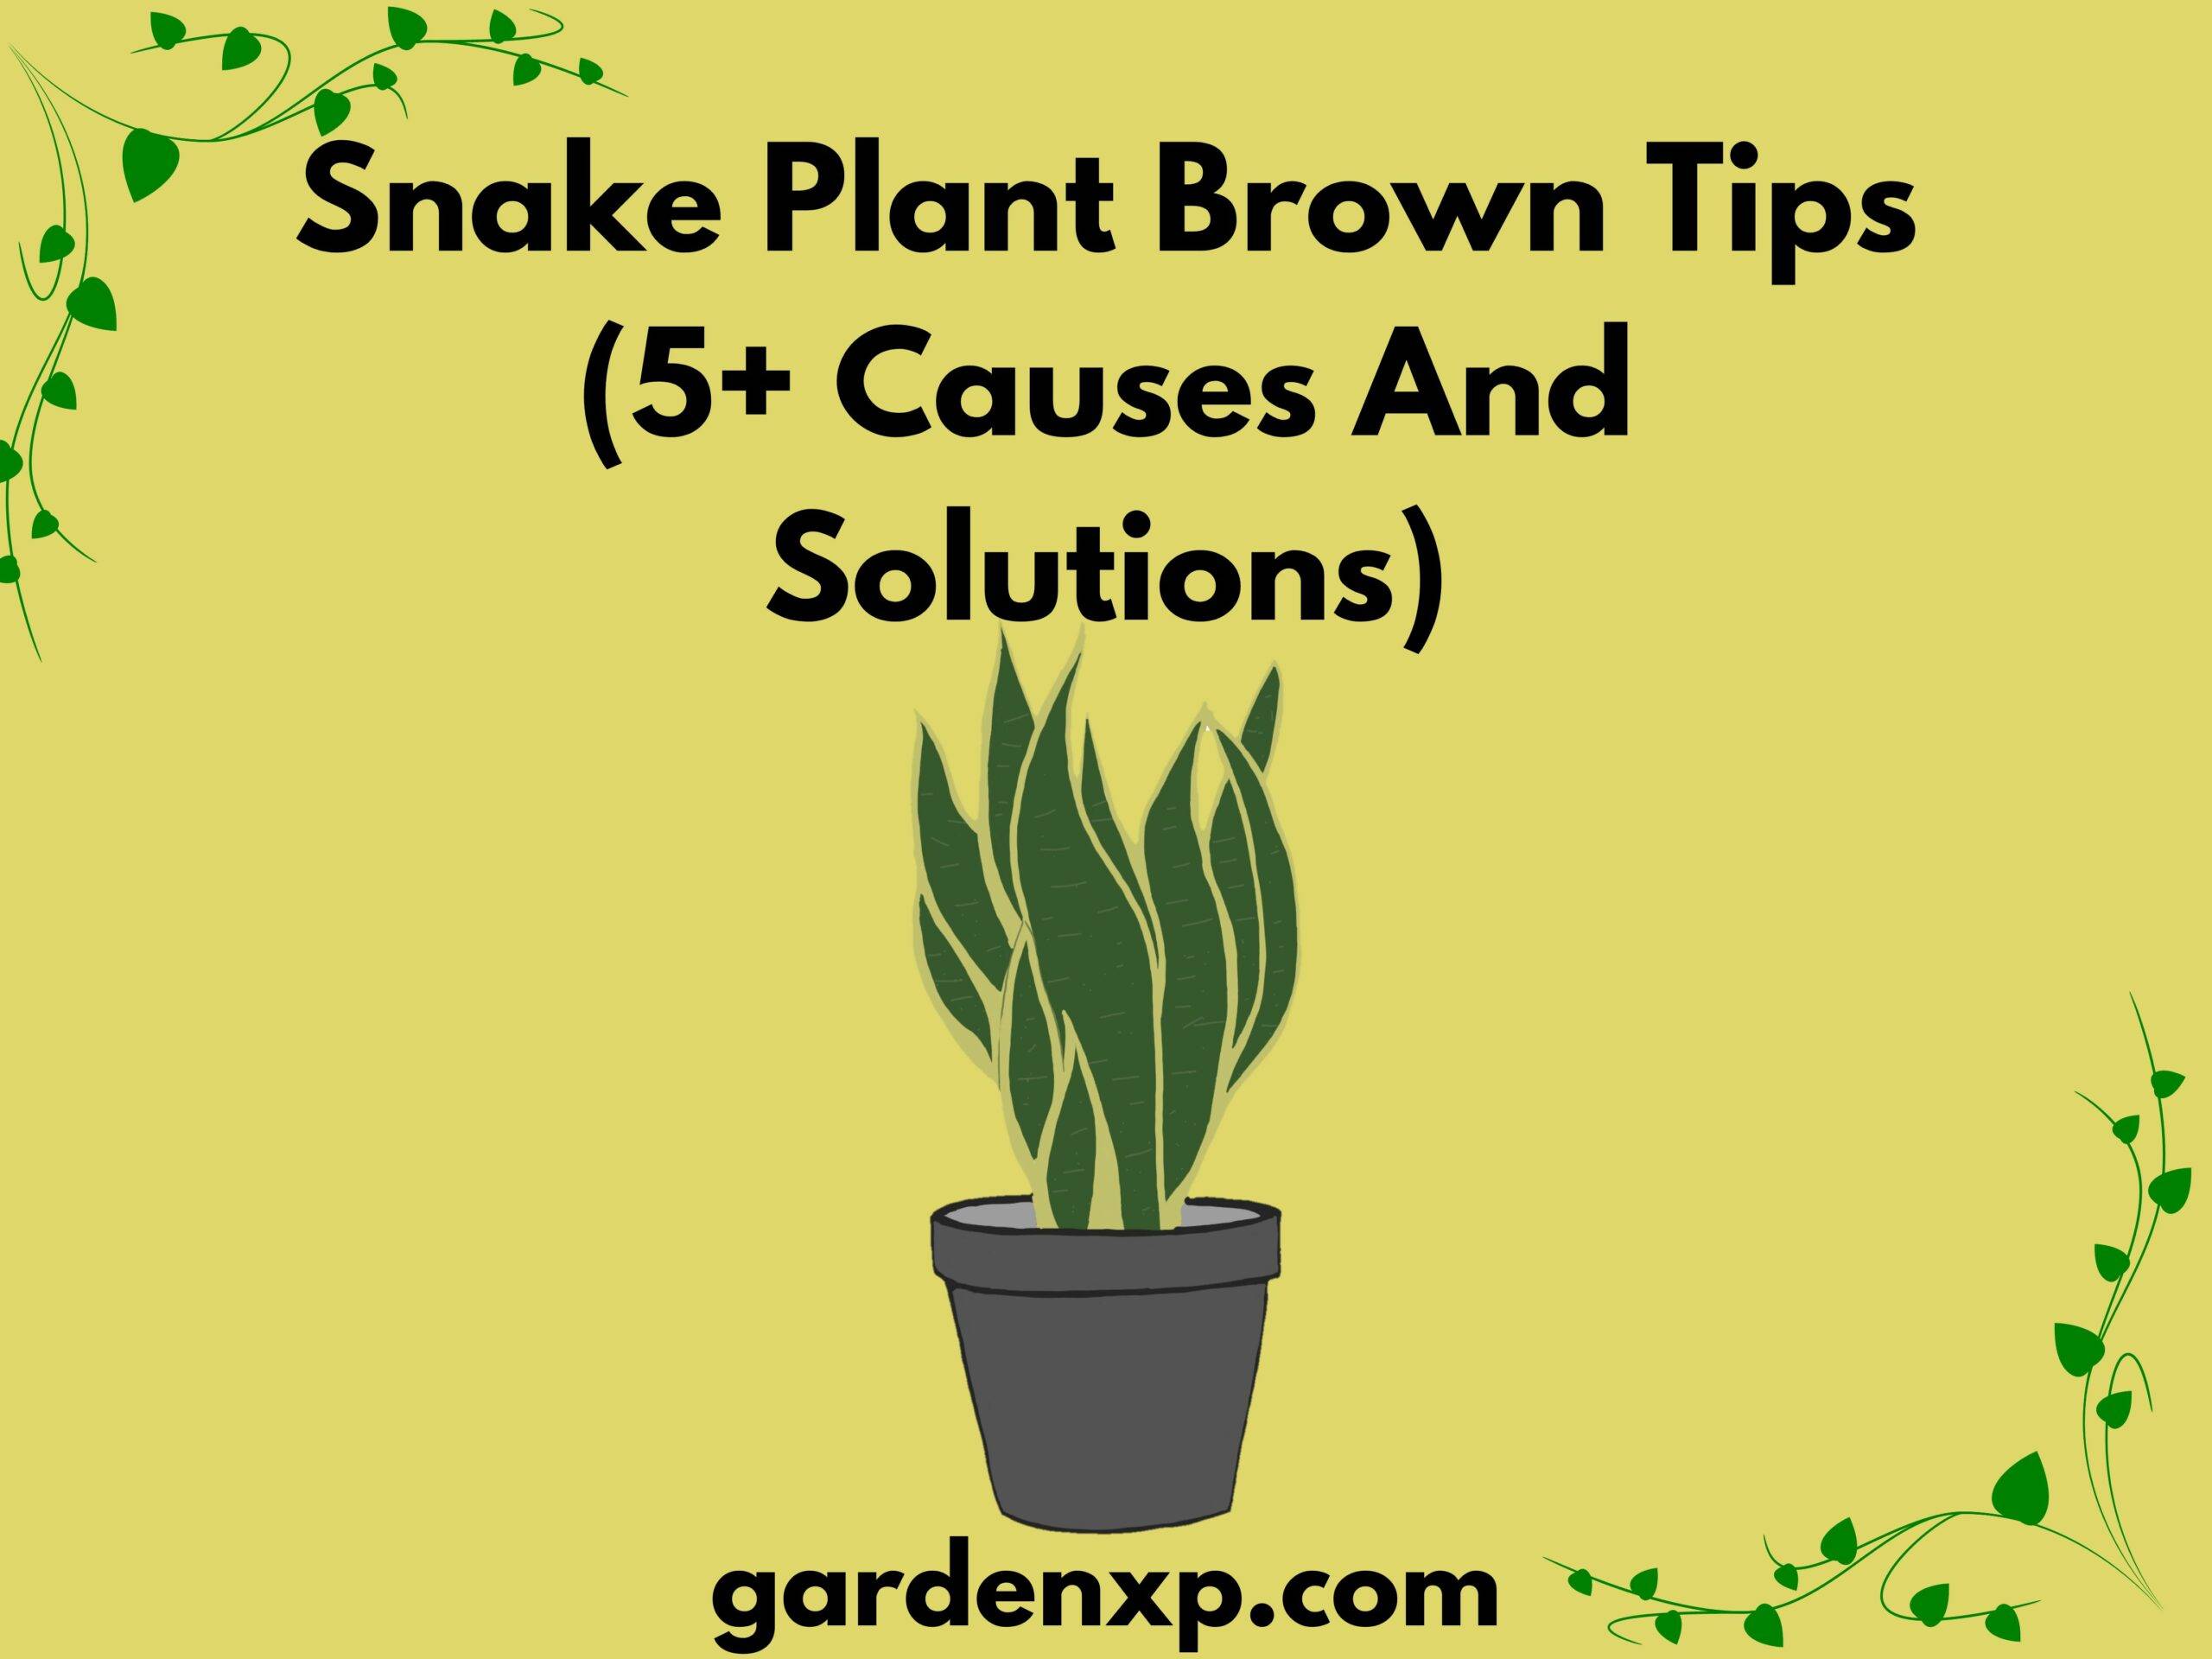 Snake Plant Brown Tips (5+ Causes And Solutions)